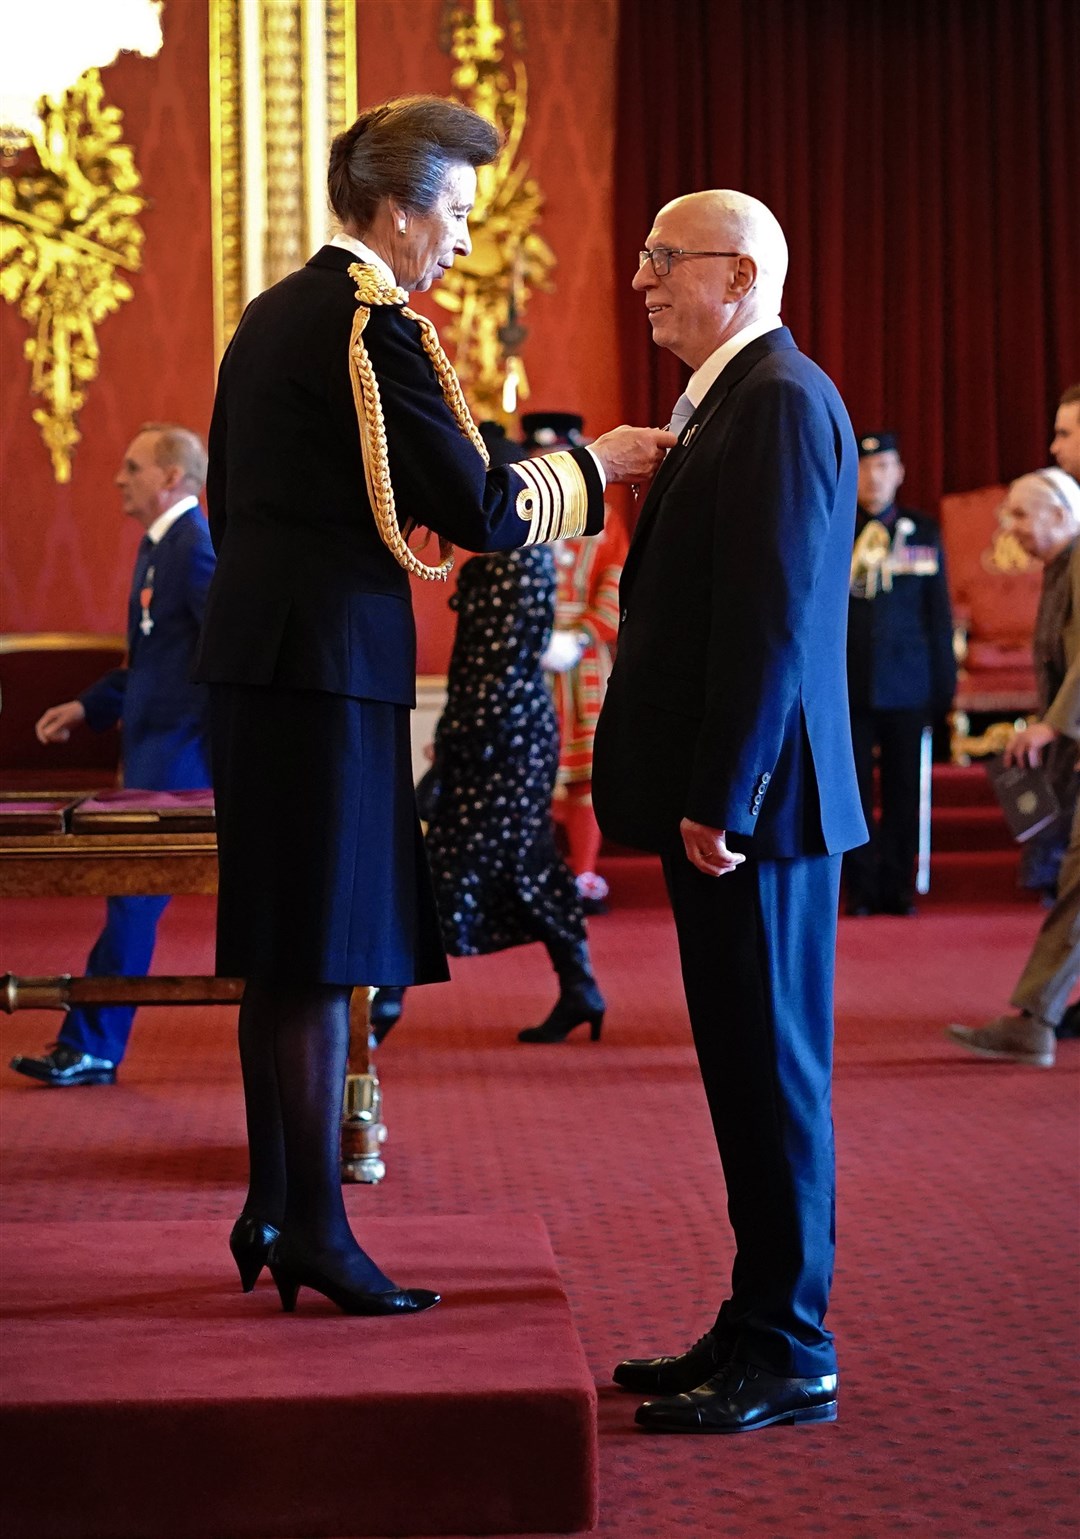 Ken Bruce was presented with the award by the Princess Royal which he said was a ‘lovely’ experience (Victoria Jones/PA)